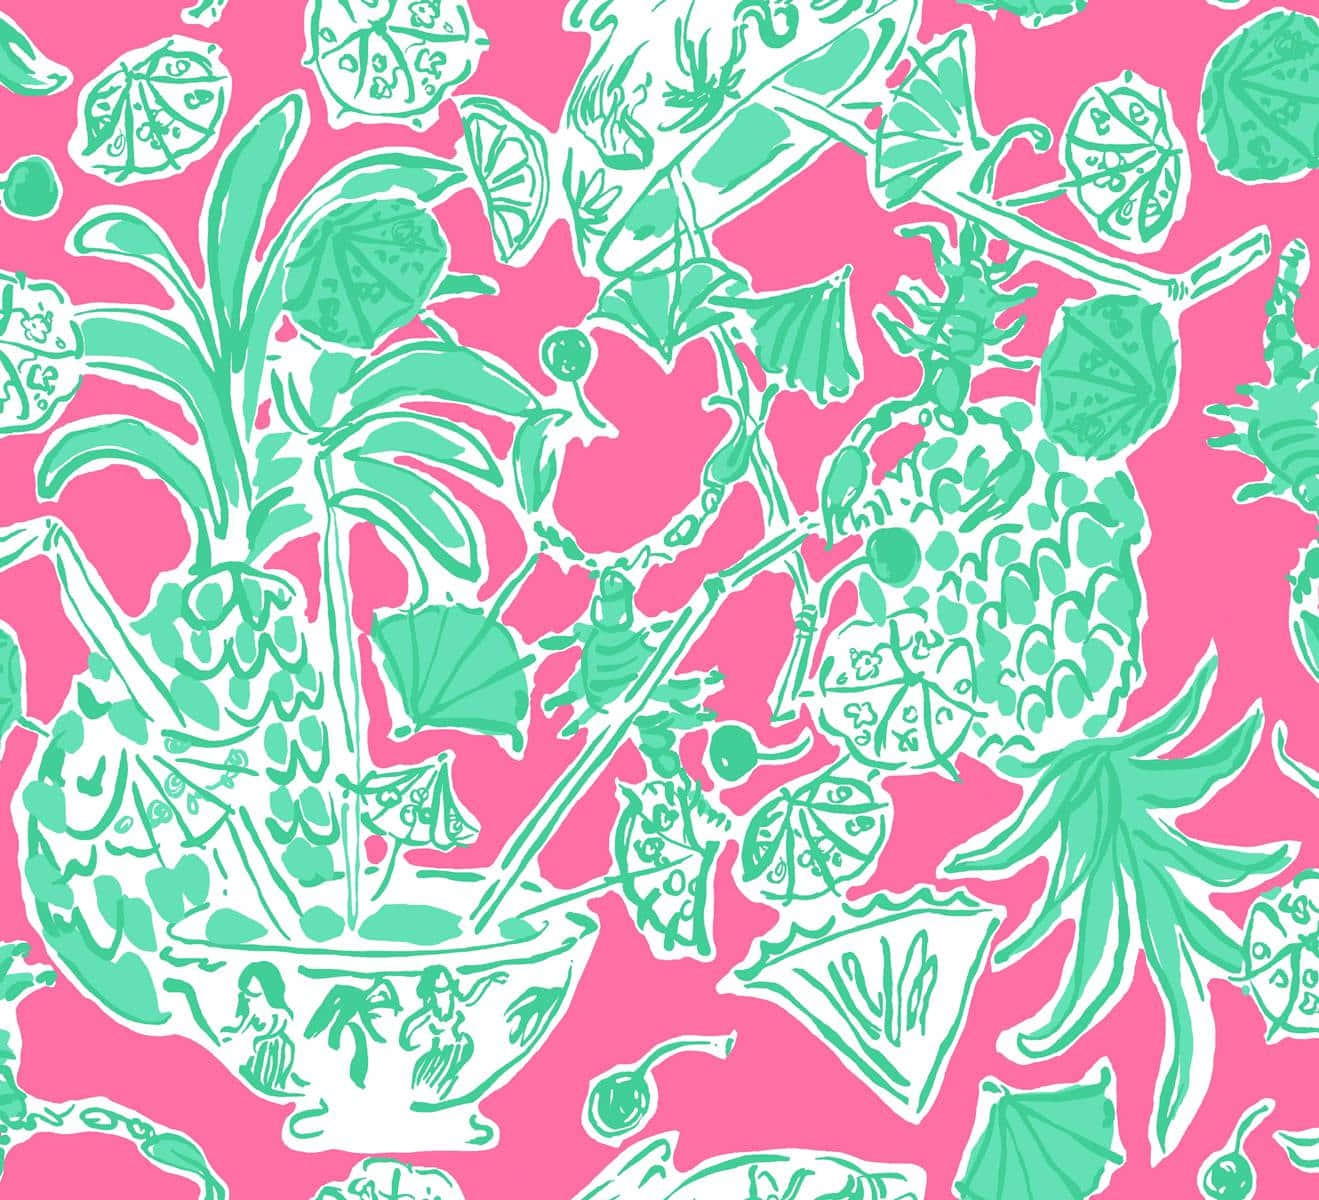 Welcome the fresh and cheerful Lilly Pulitzer style into your wardrobe.